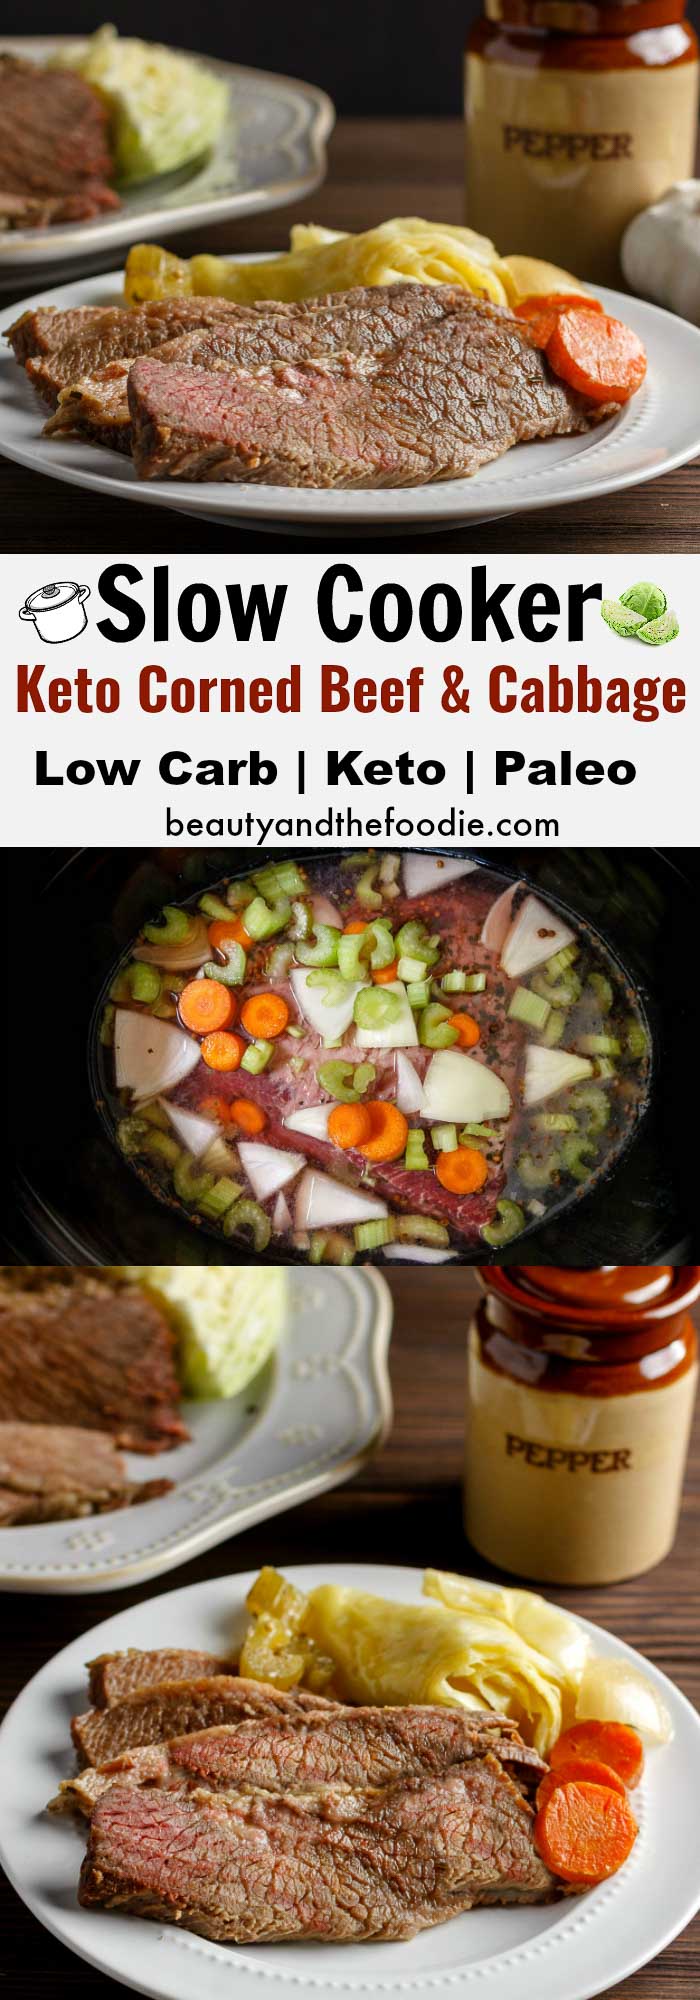 Slow Cooker Corned Beef Cabbage- low Carb & Paleo